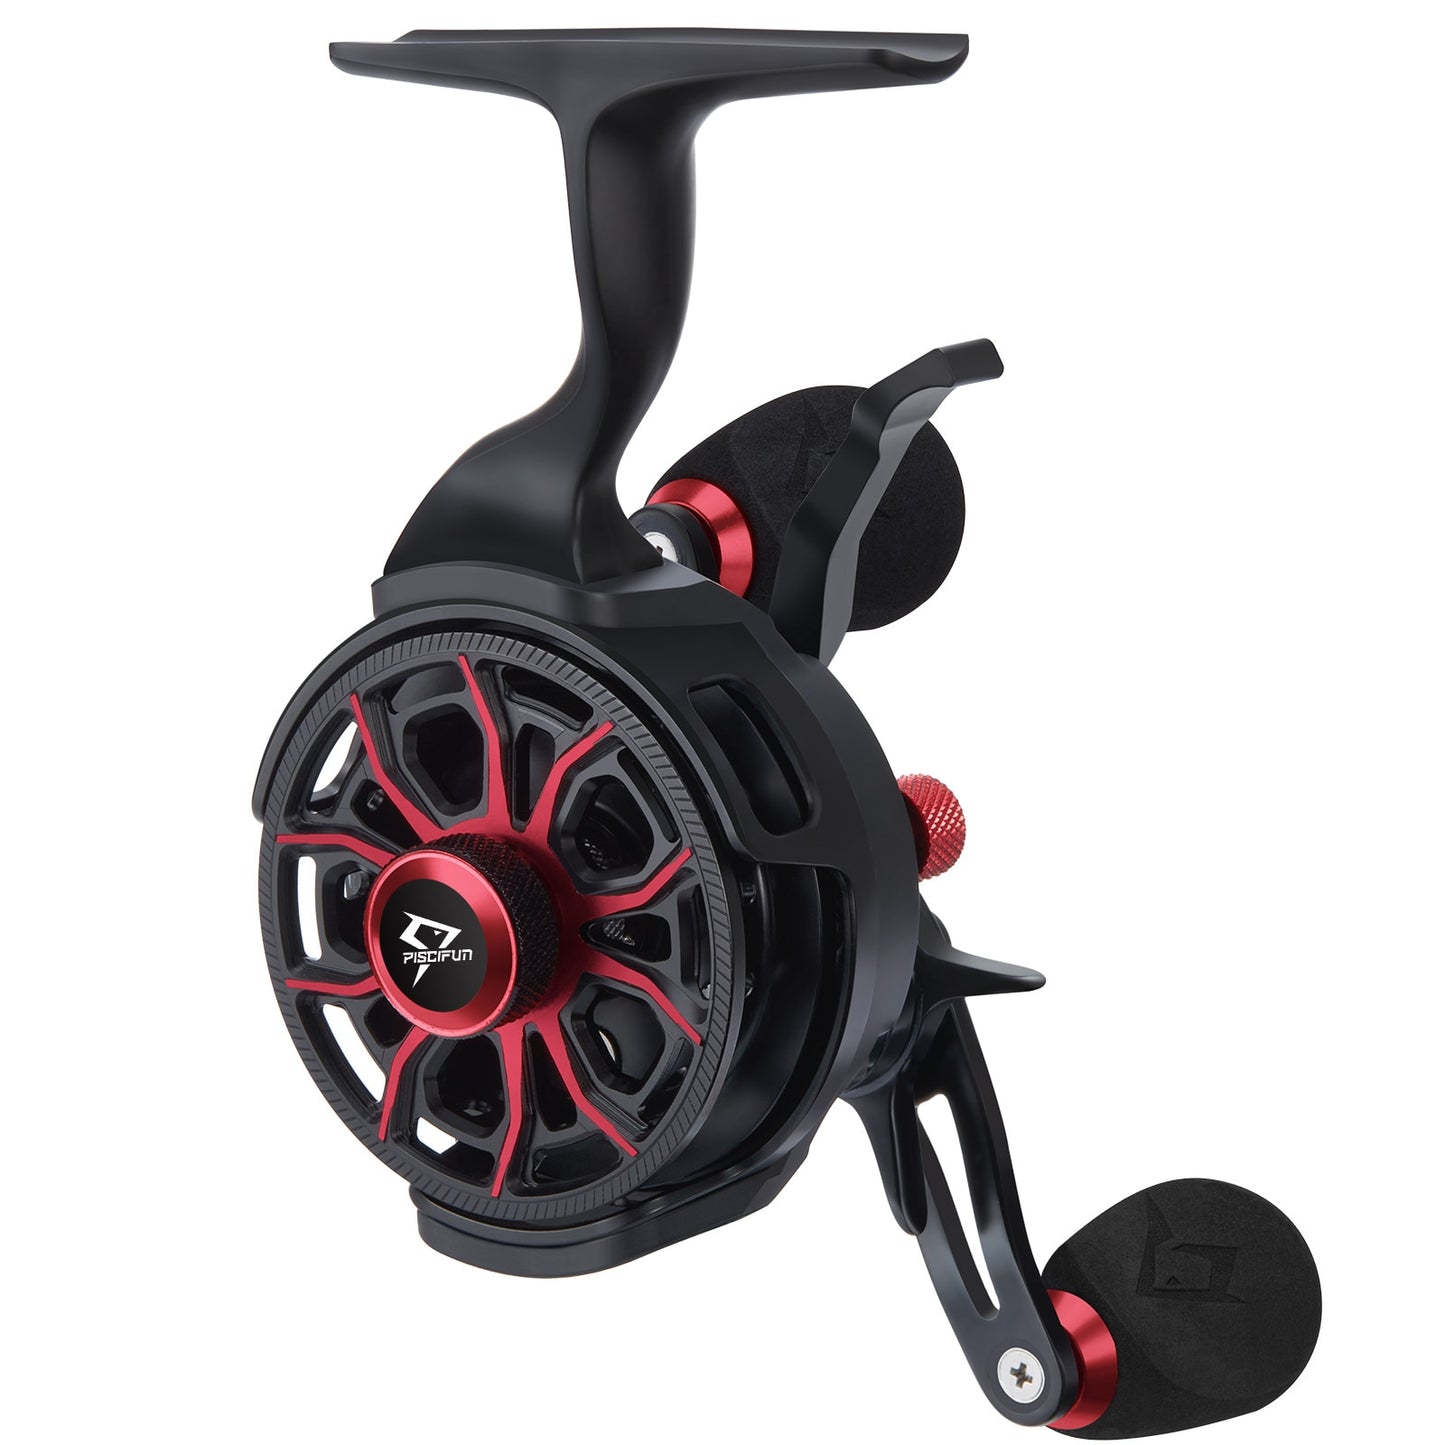 Piscifun ICX CARBON Ice Fishing Reels 3.2:1 High Speed Free Fall Dual-mode Trigger 8+1 Shielded BB Smooth Magnetic Winter Reel